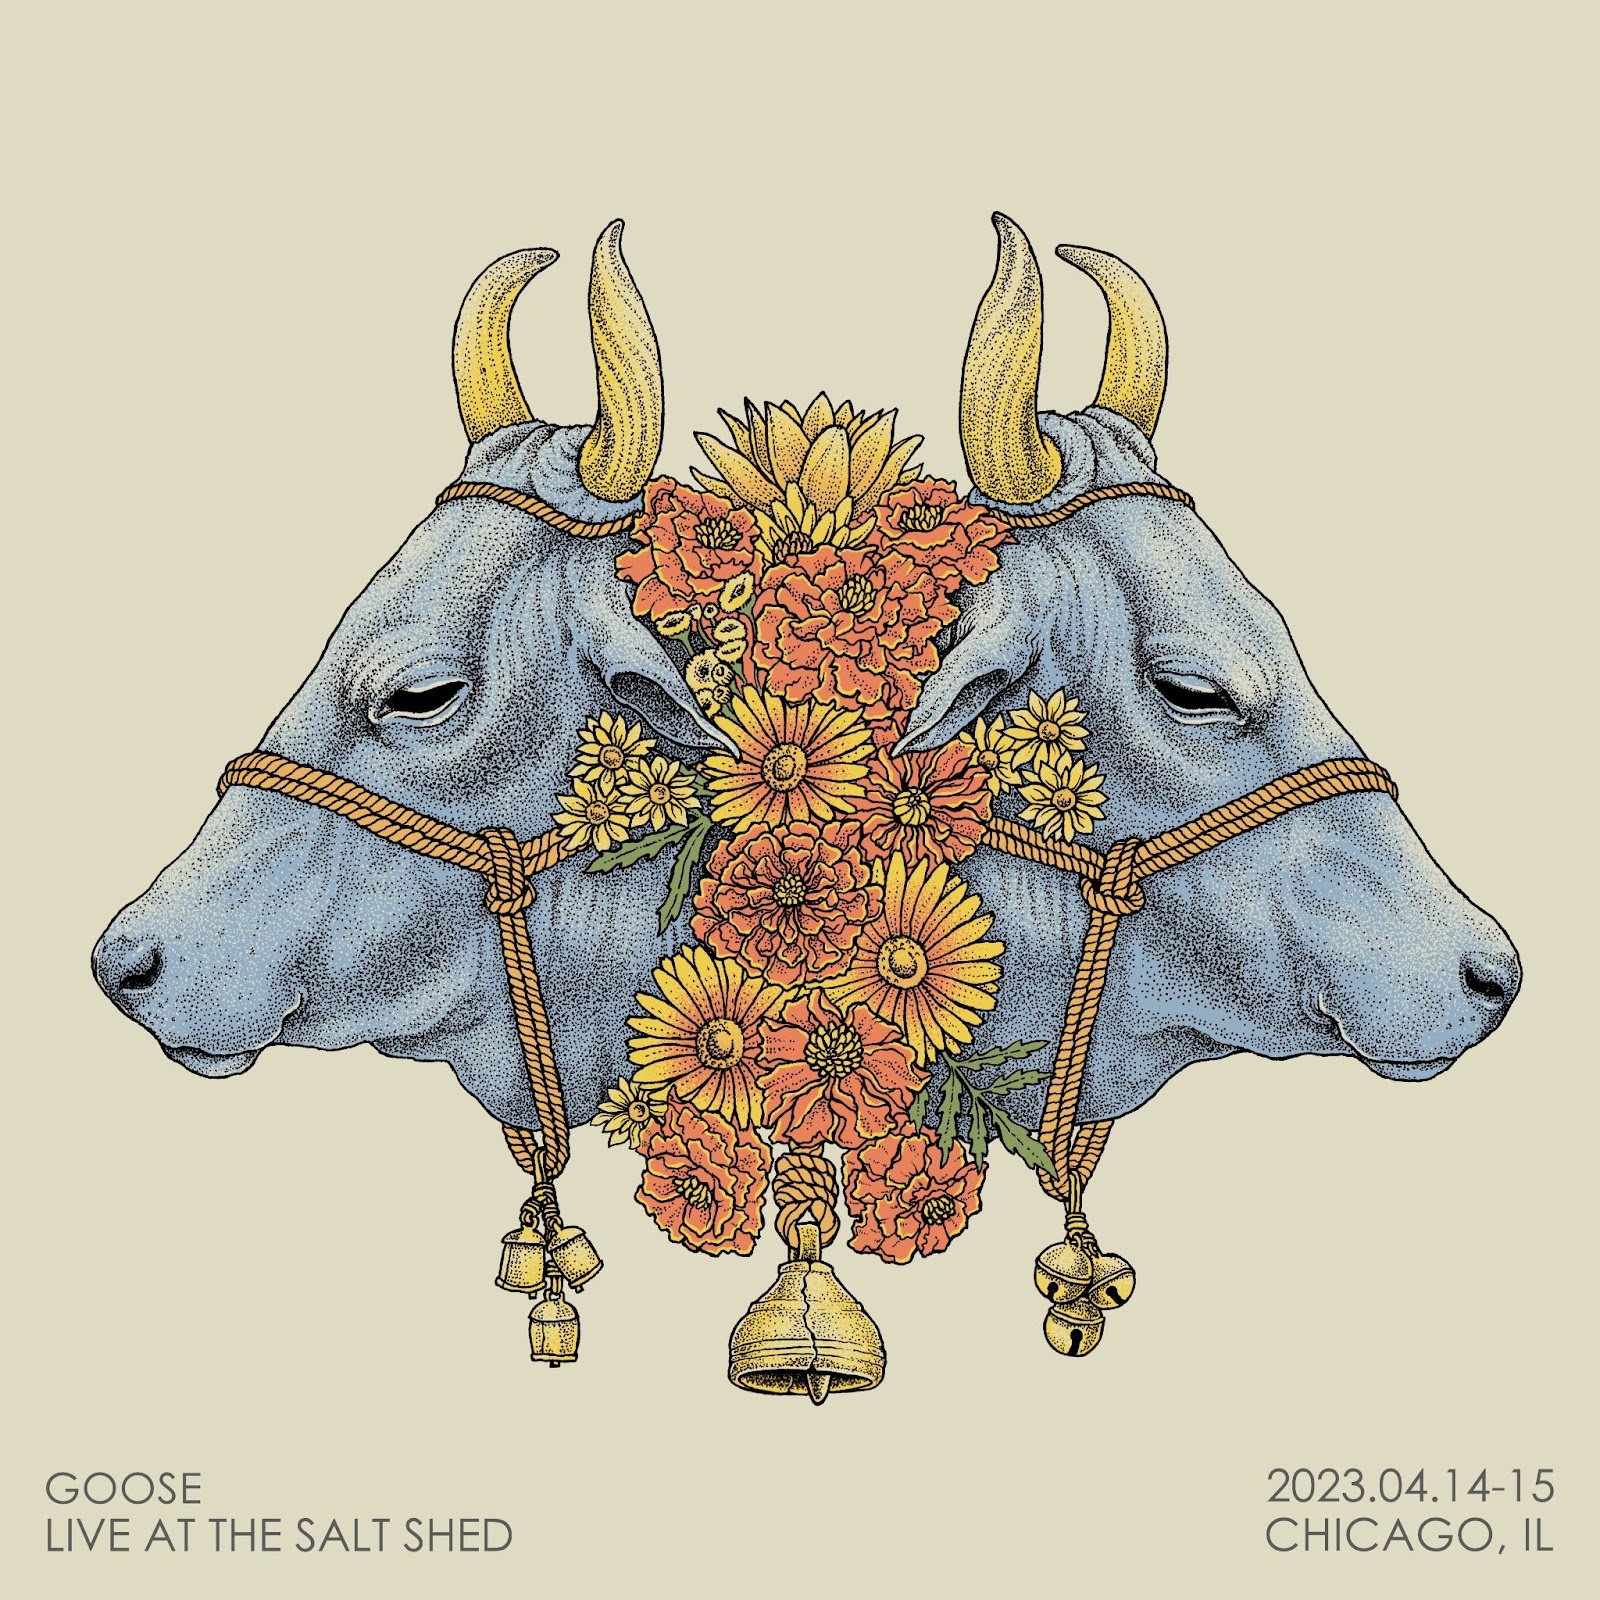 GOOSE COMMEMORATES SOLD OUT CHICAGO RUN WITH "LIVE AT THE SALT SHED" ALBUM RELEASE